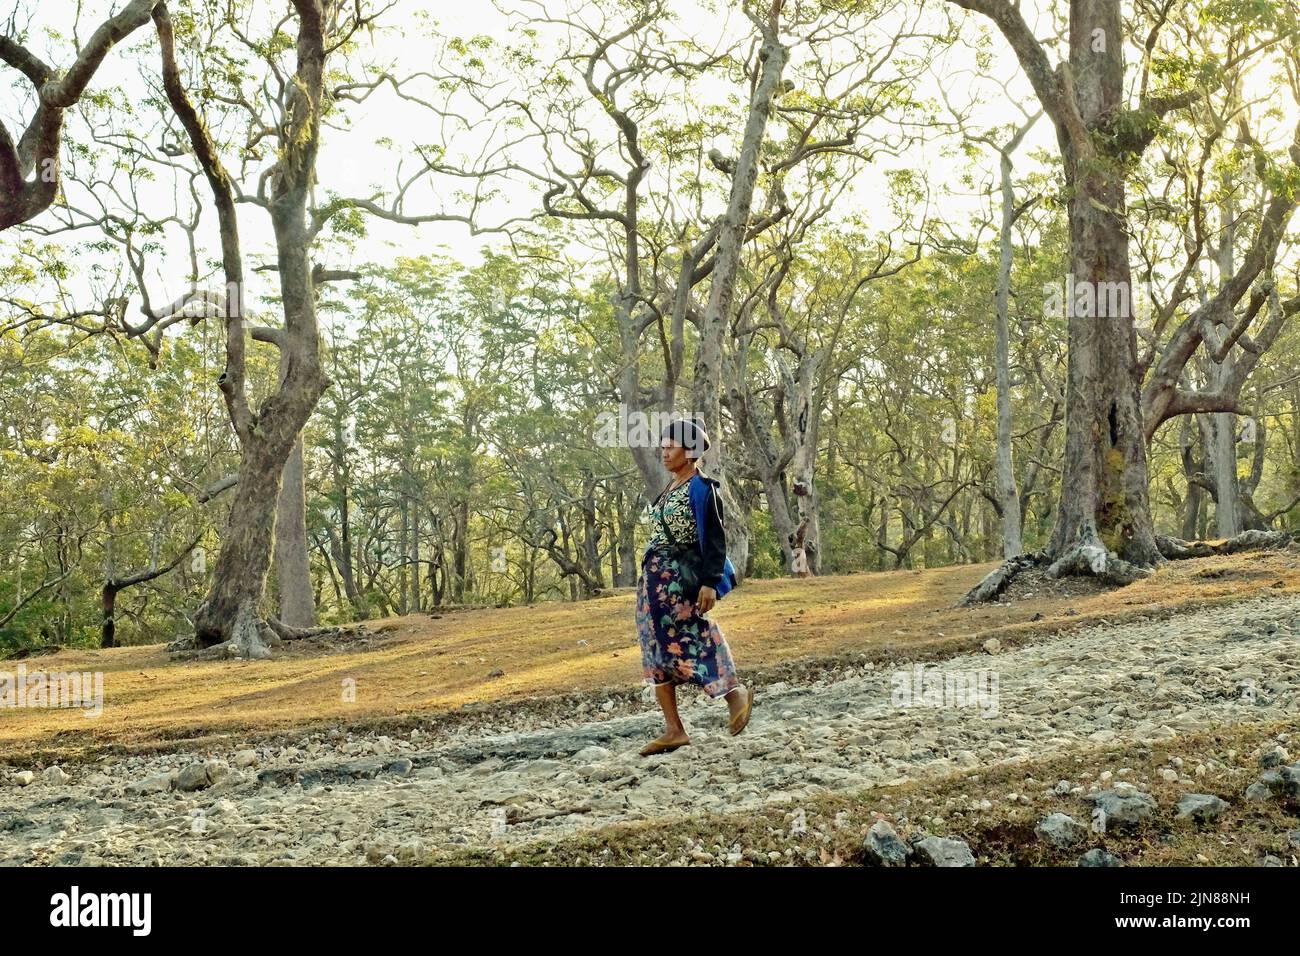 Yuliana Fuka, villager and a part time ecotourism guide, is walking on a rural road between forest near Fatumnasi village in South Central Timor, East Nusa Tenggara, Indonesia. Stock Photo